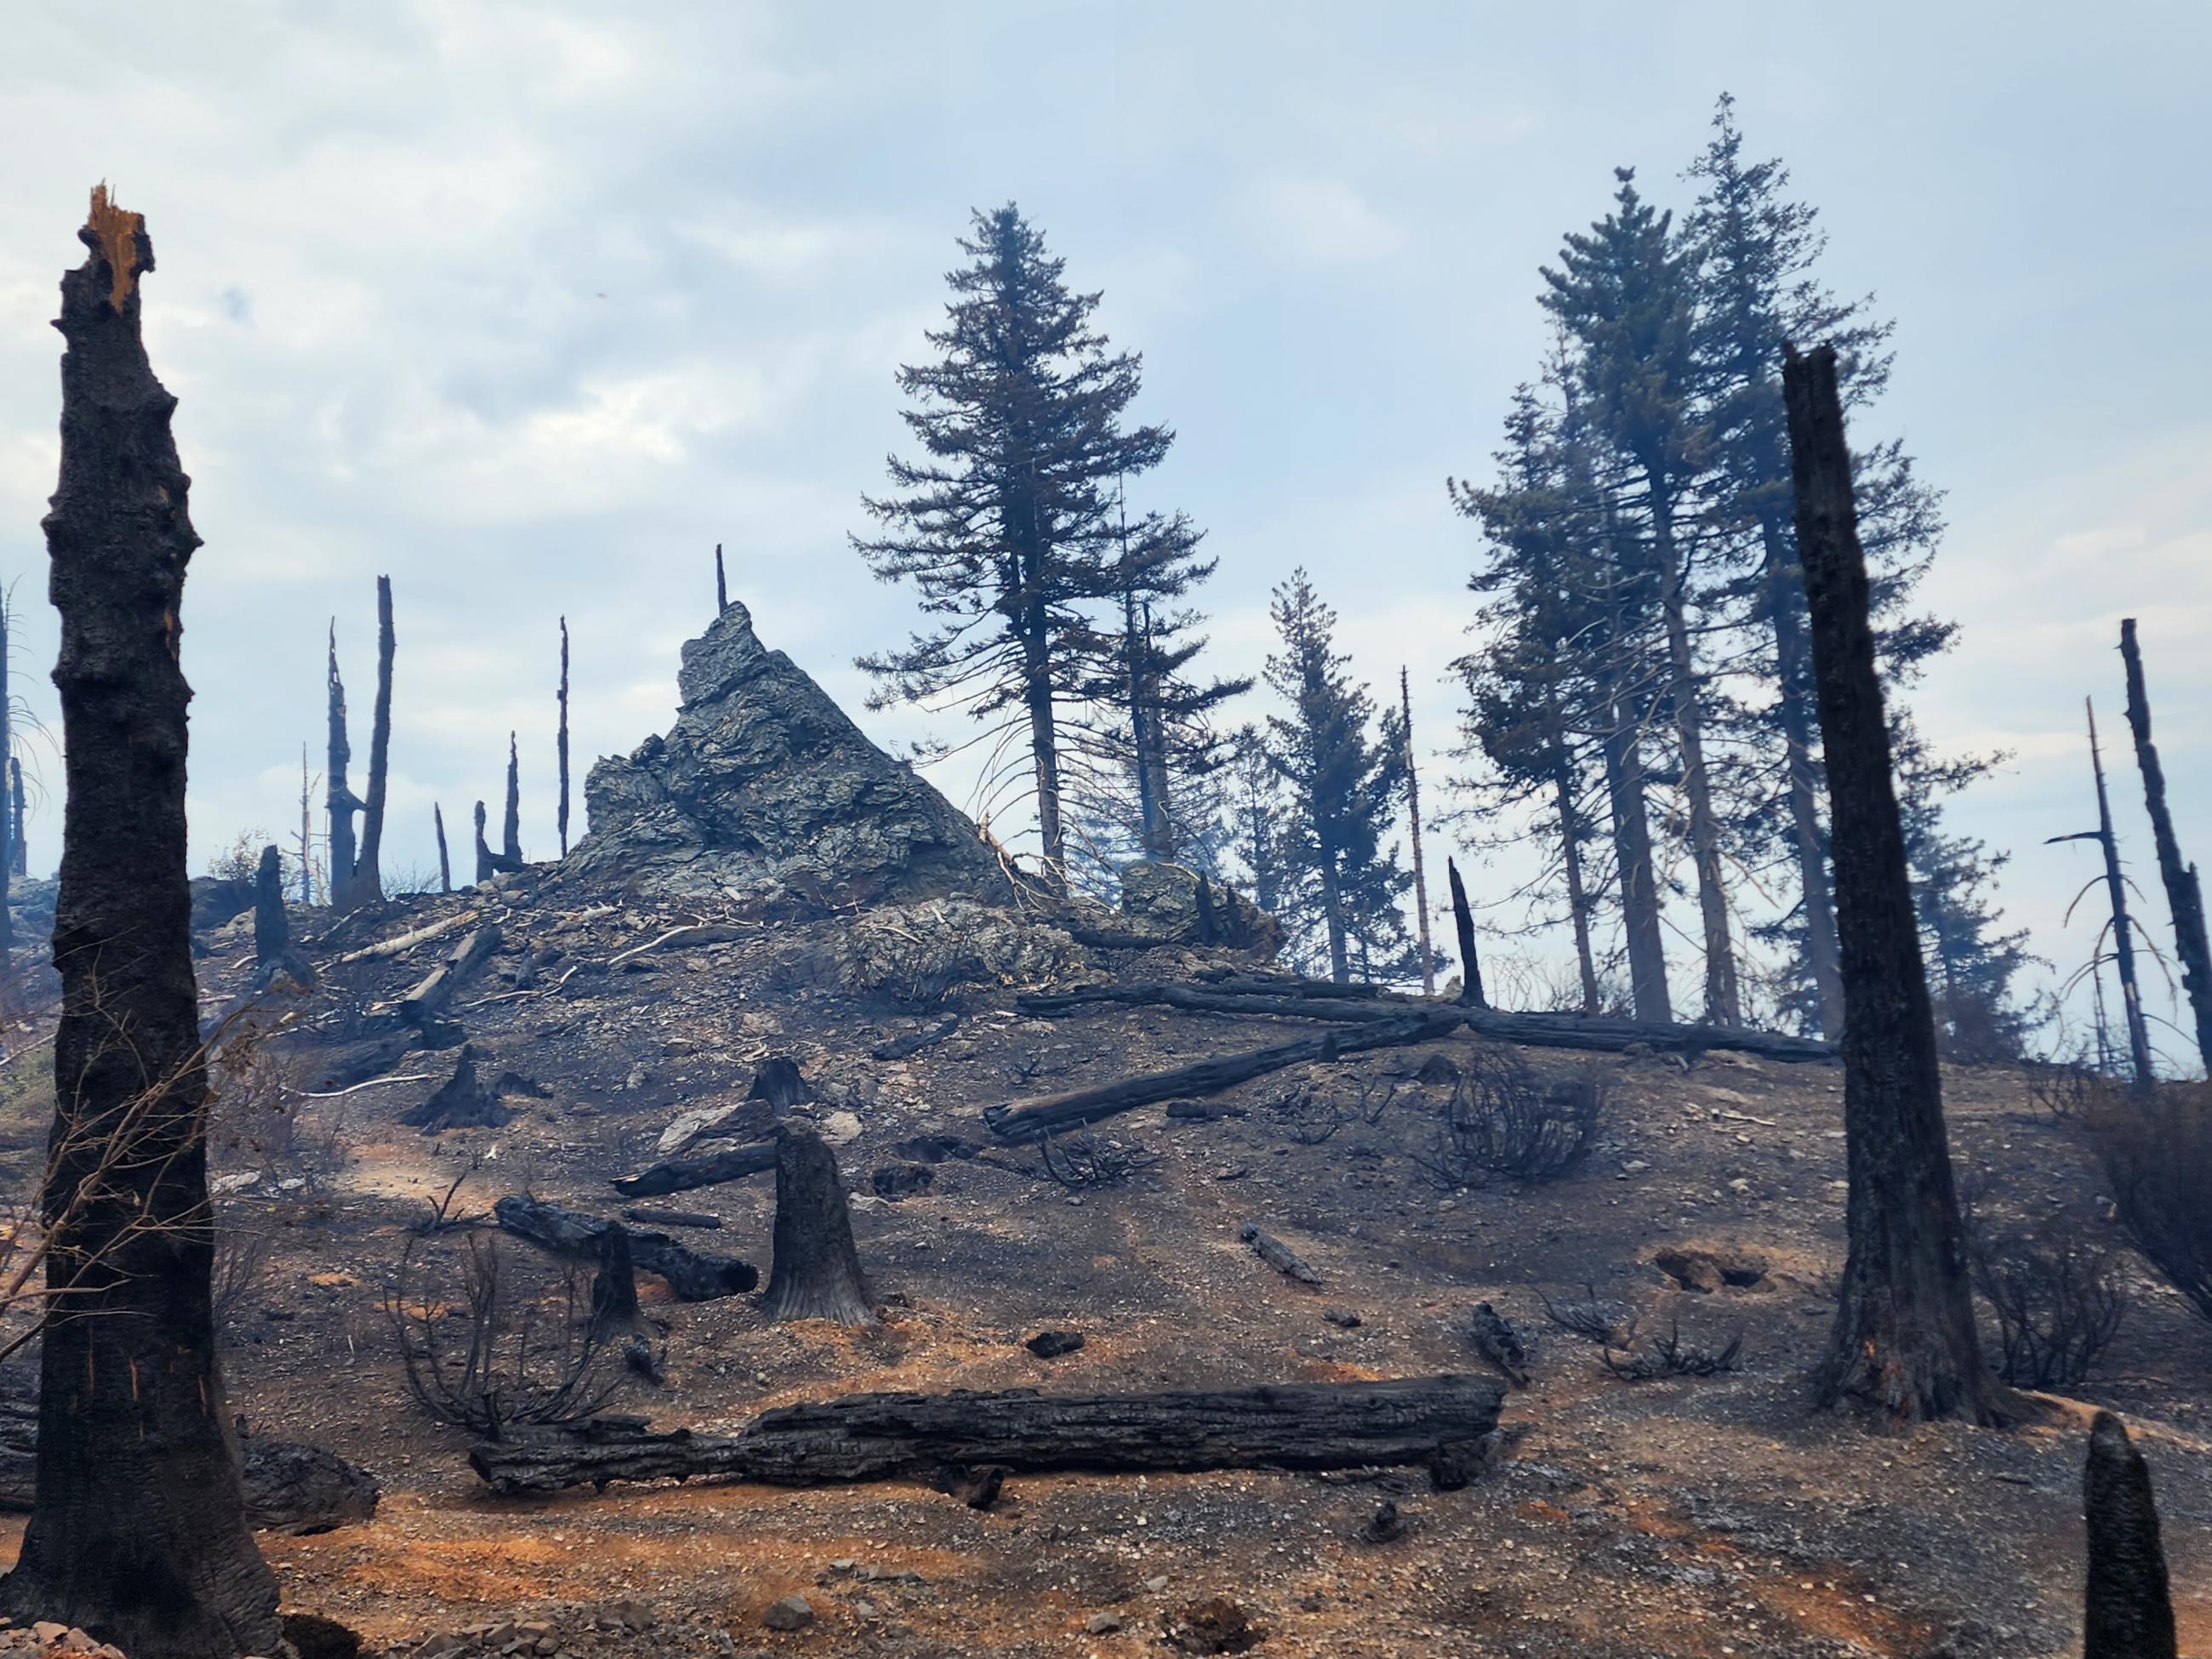 Image shows live standing trees undamaged from the fire, but little underbrush remains.  Several fallen logs on the ground remain blackened. but not completely burned.